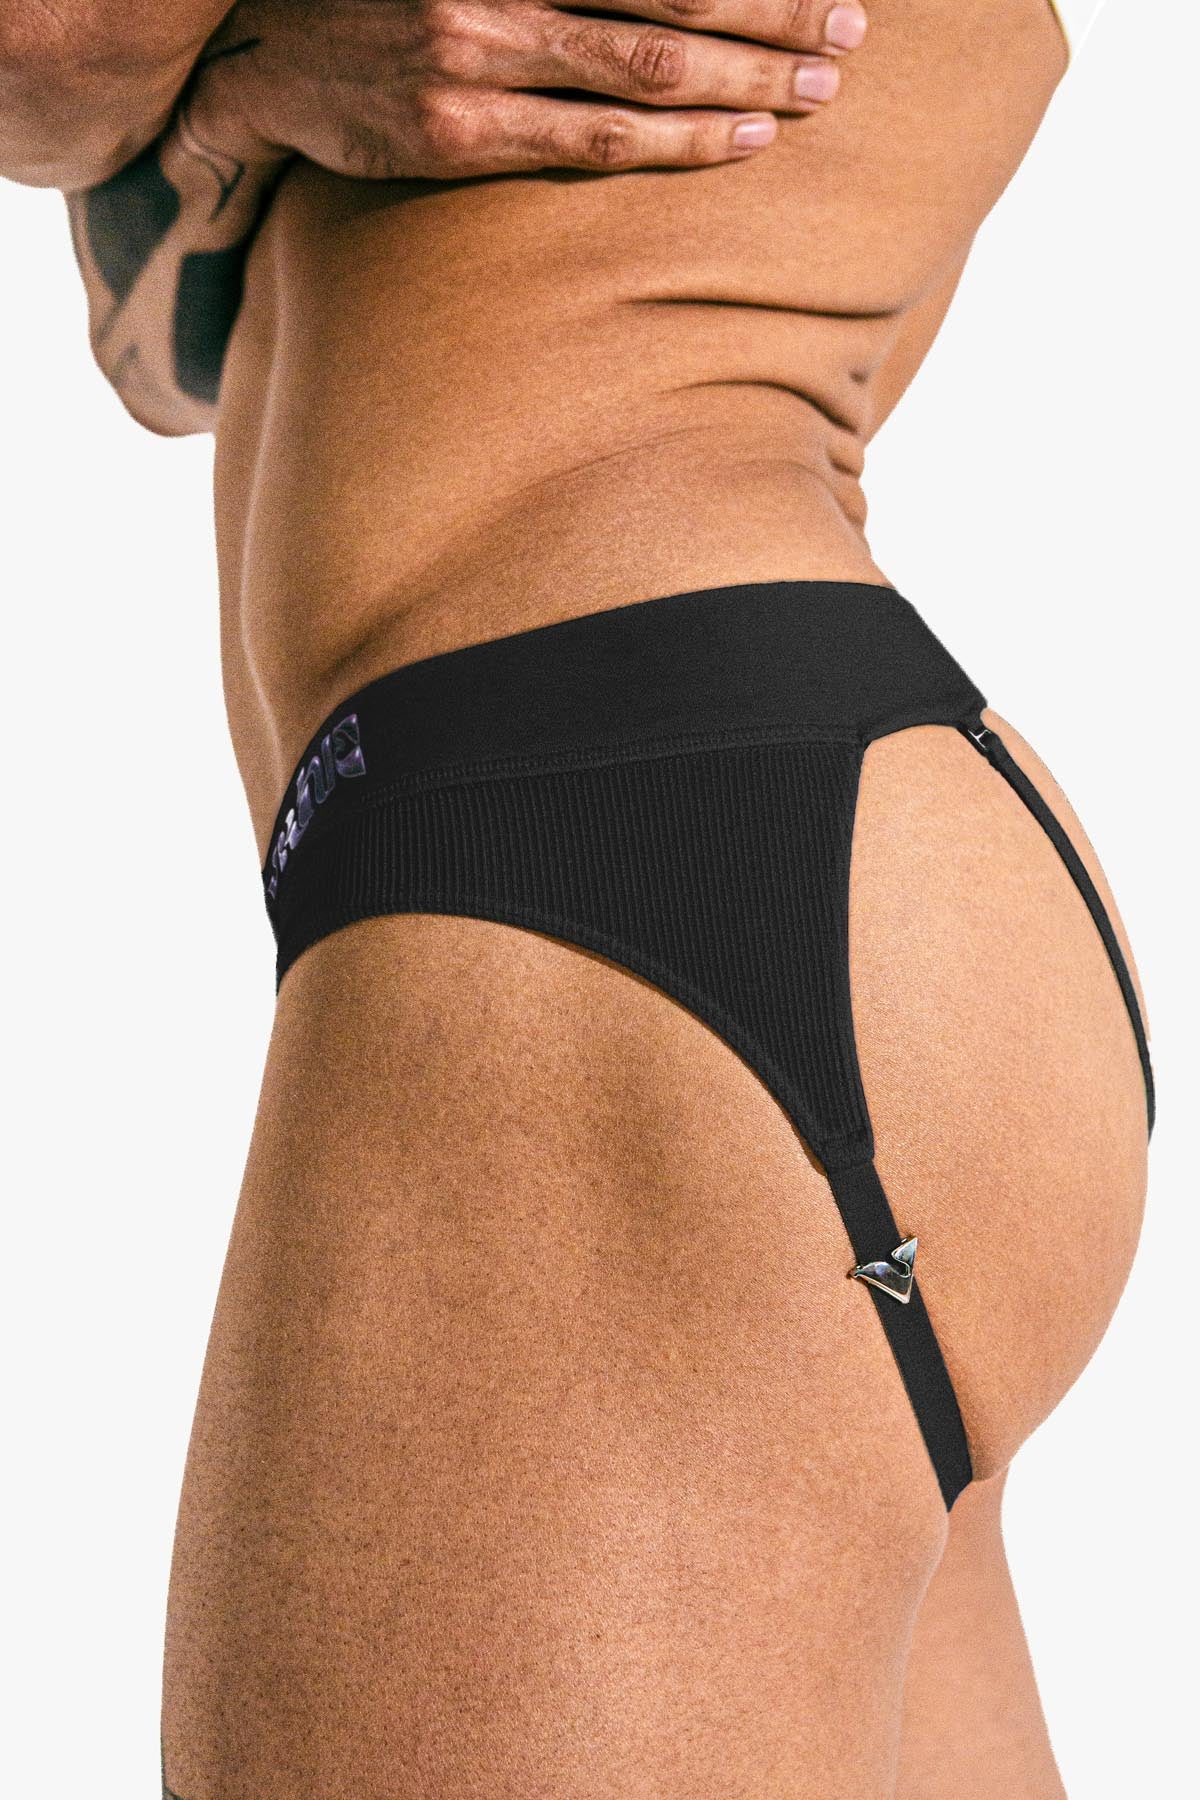 Ribbed Strap Brief - Pouch, Black